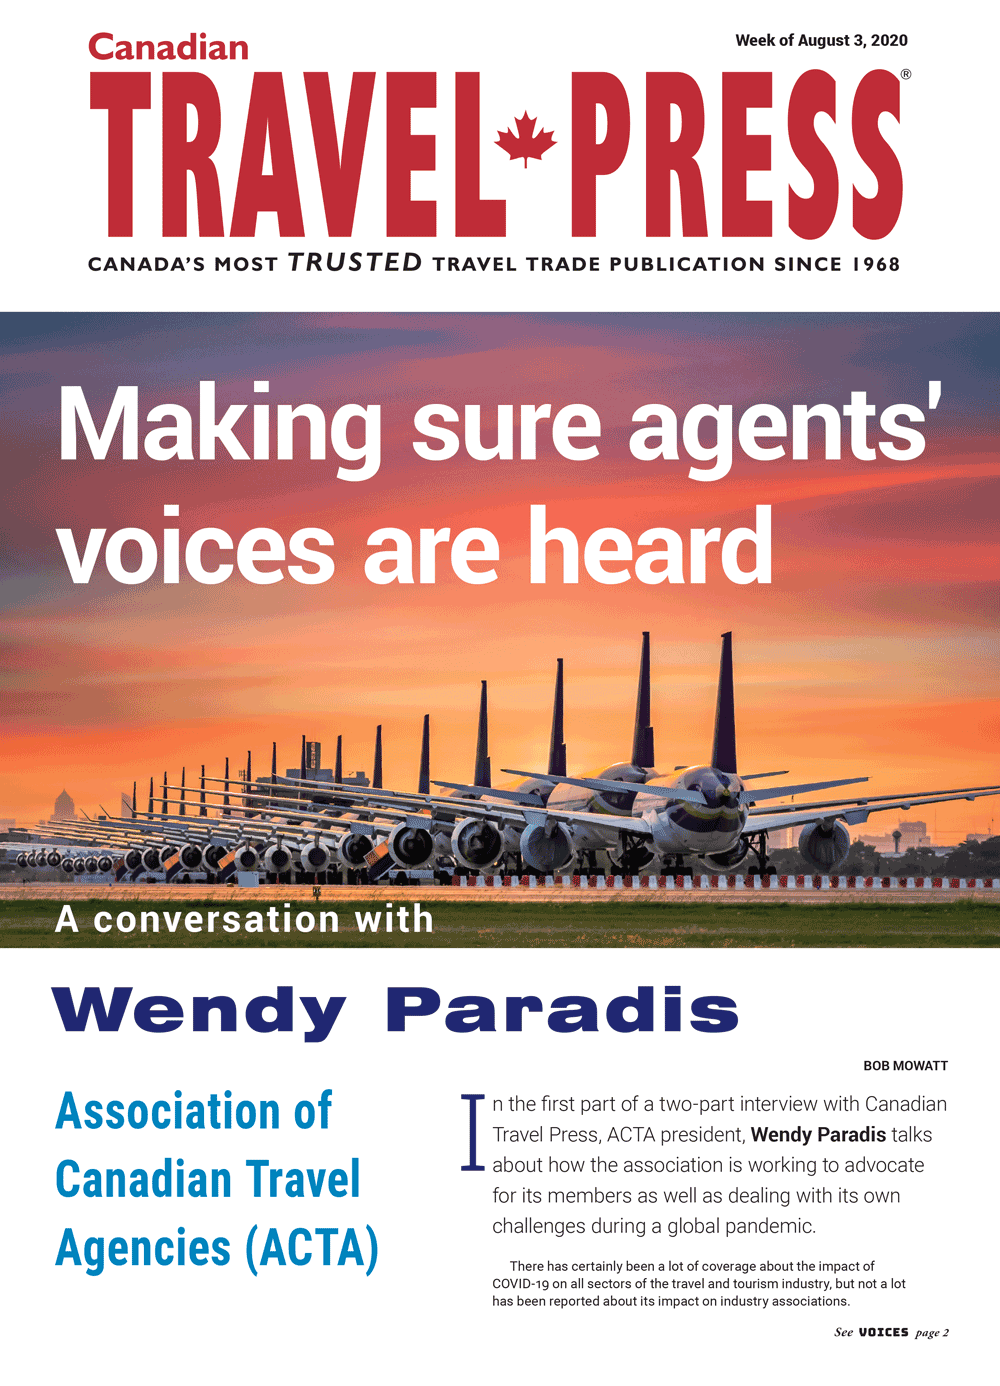 Making sure travel agents are heard